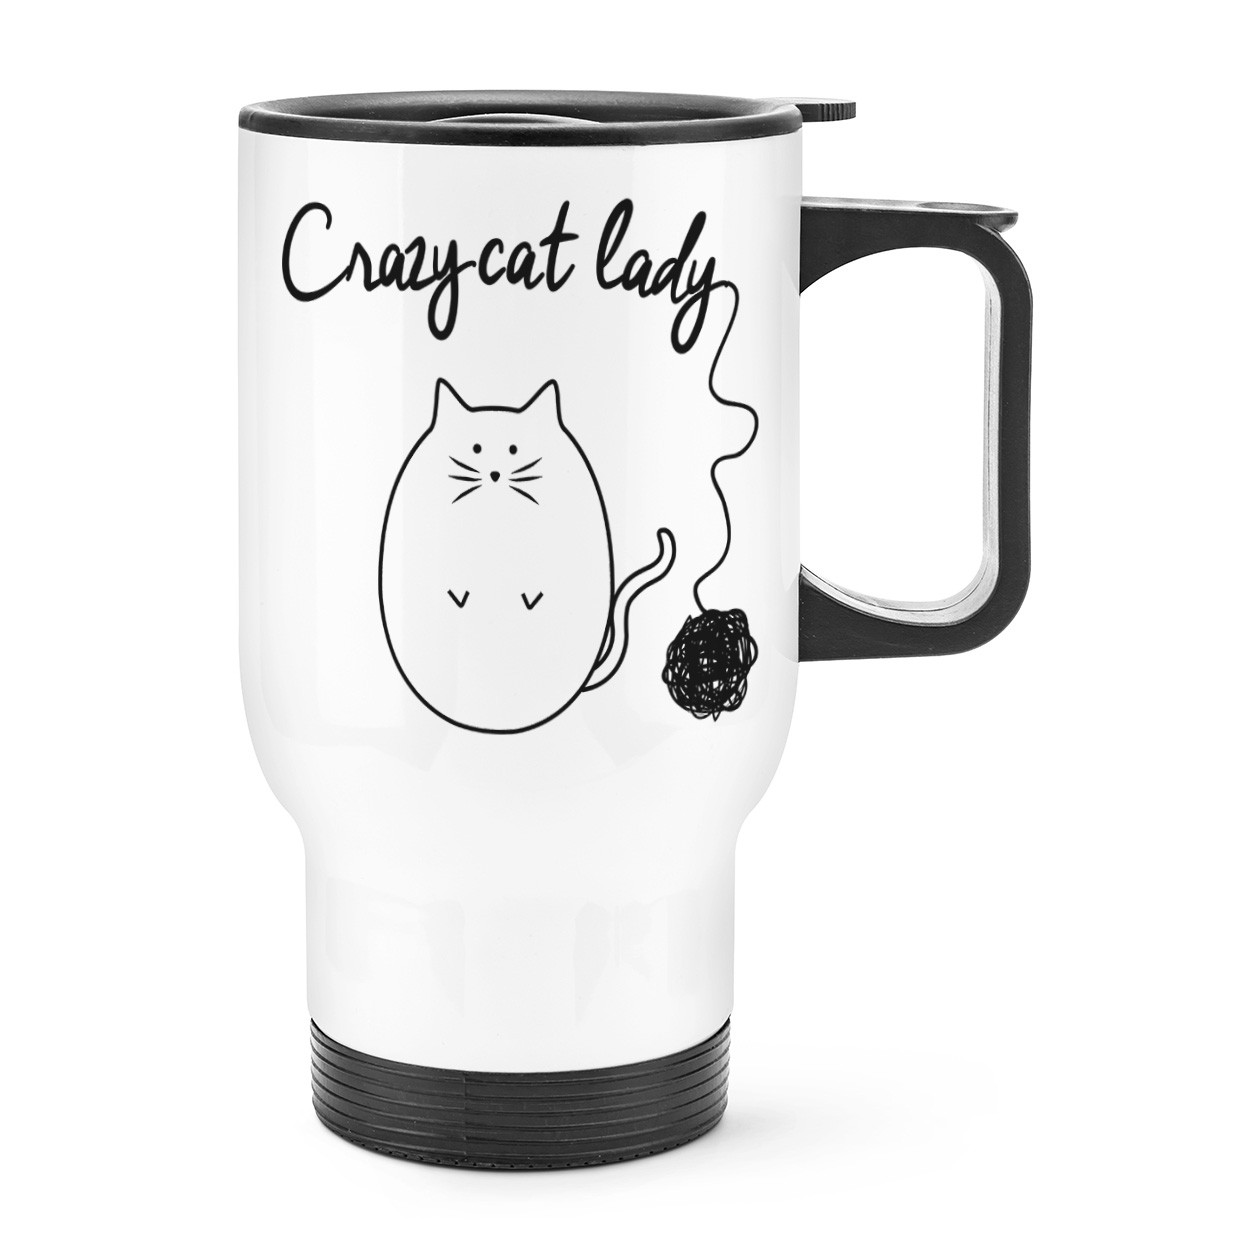 Ball Of Yarn Crazy Cat Lady Travel Mug Cup With Handle